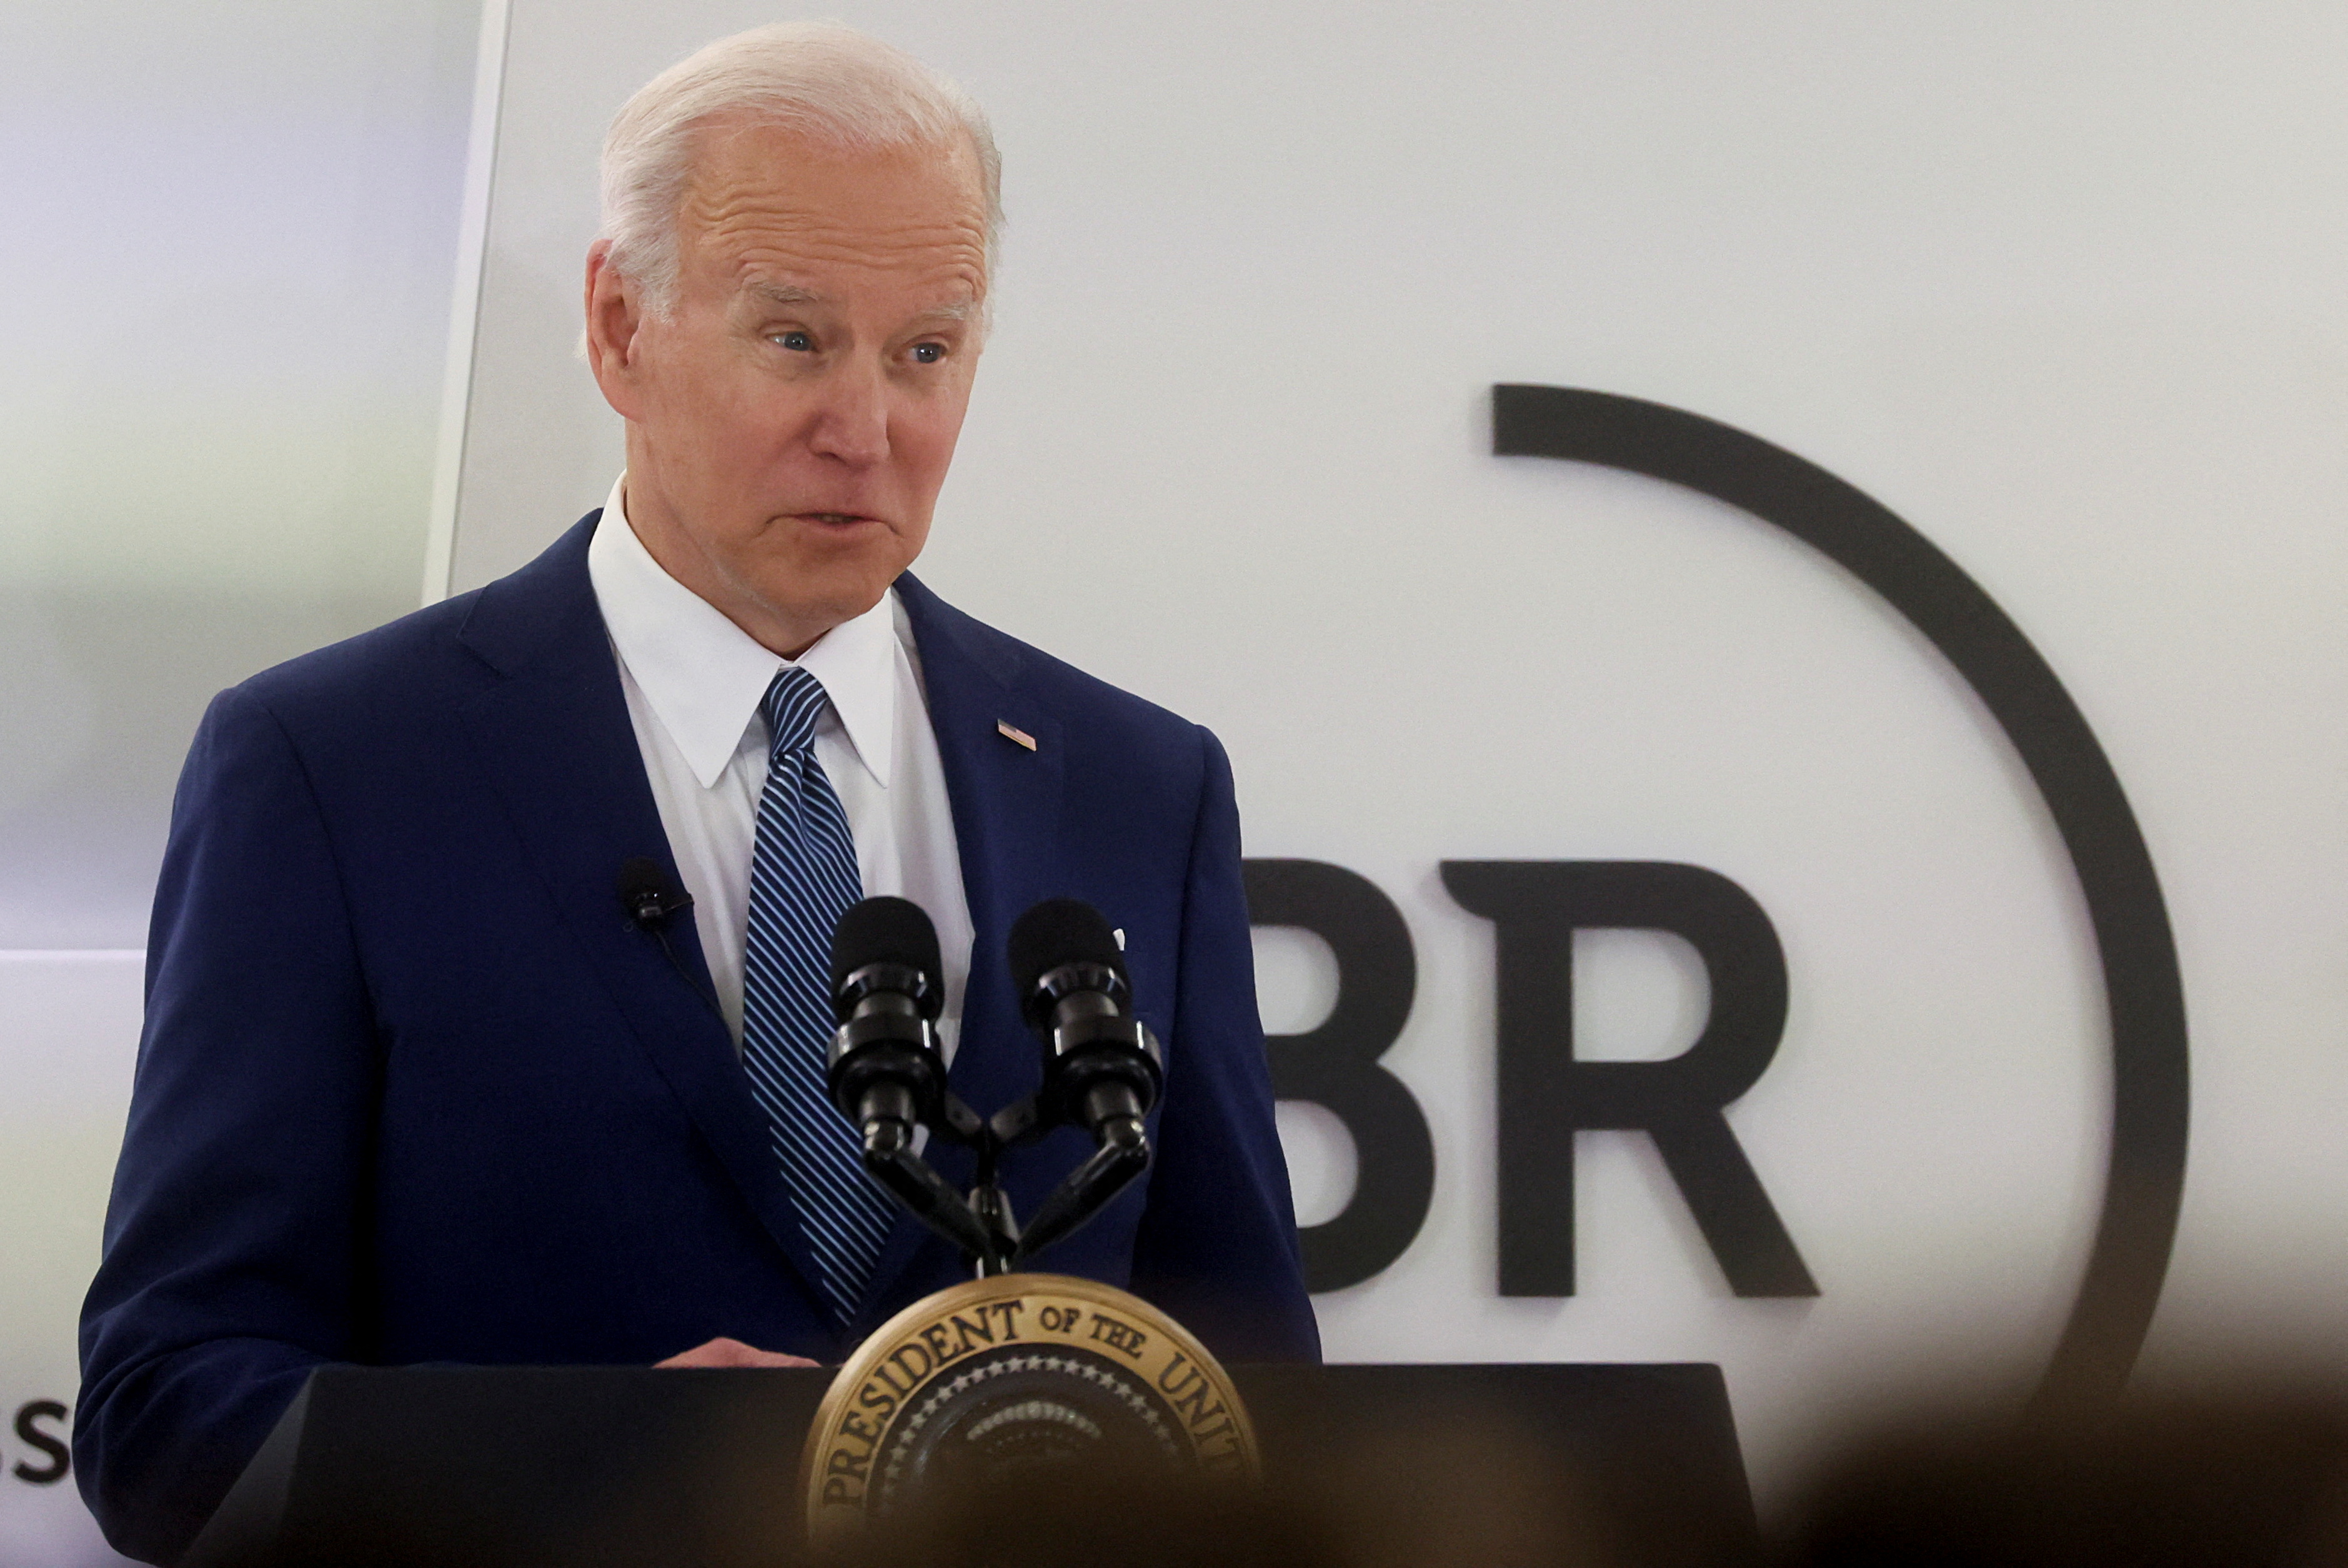 U.S. President Biden discusses the United States' response to Russian invasion of Ukraine, and warns CEOs about potential cyber attacks from Russia, in Washington